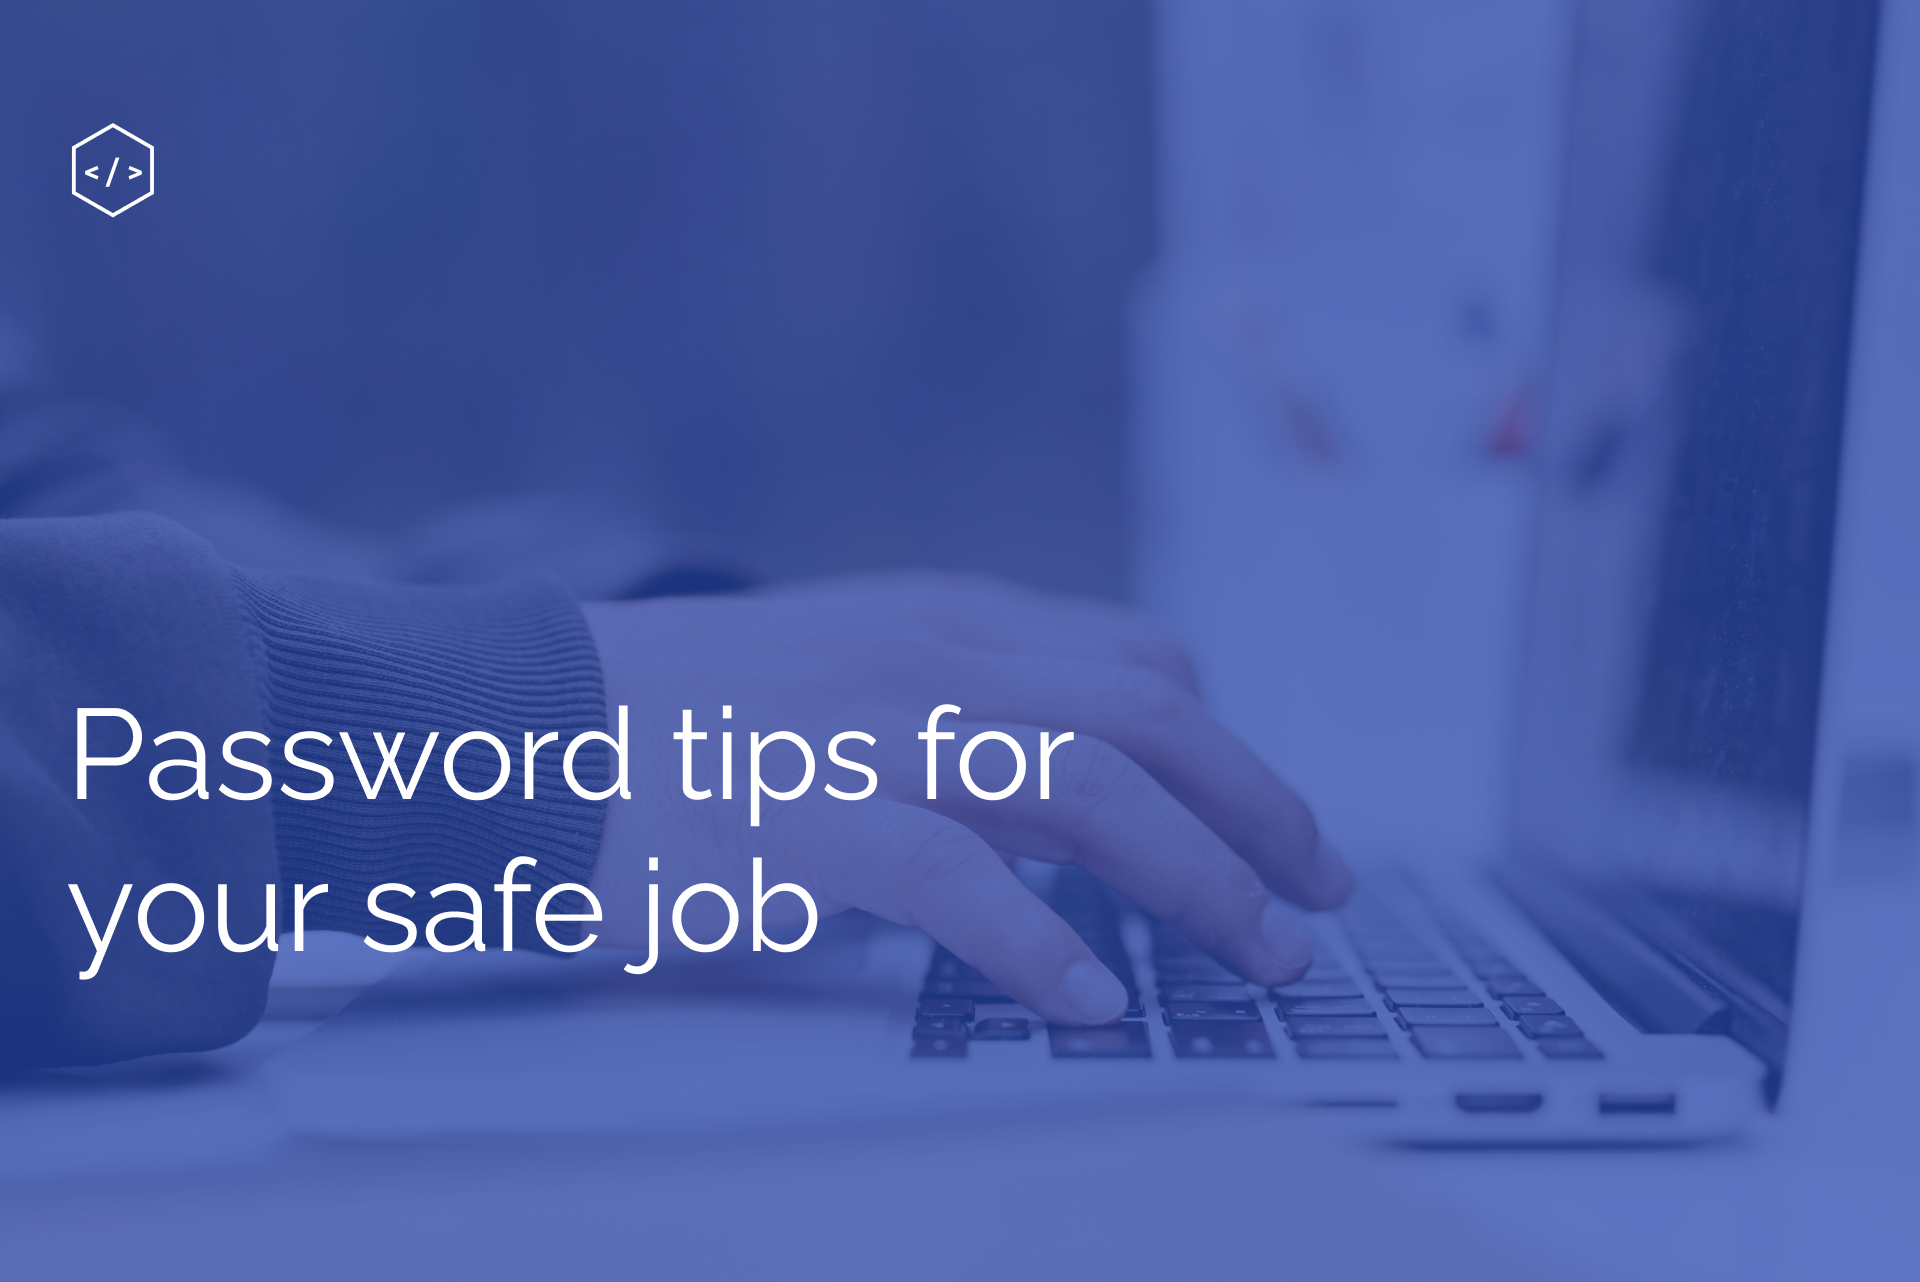 11 tips for the password safety